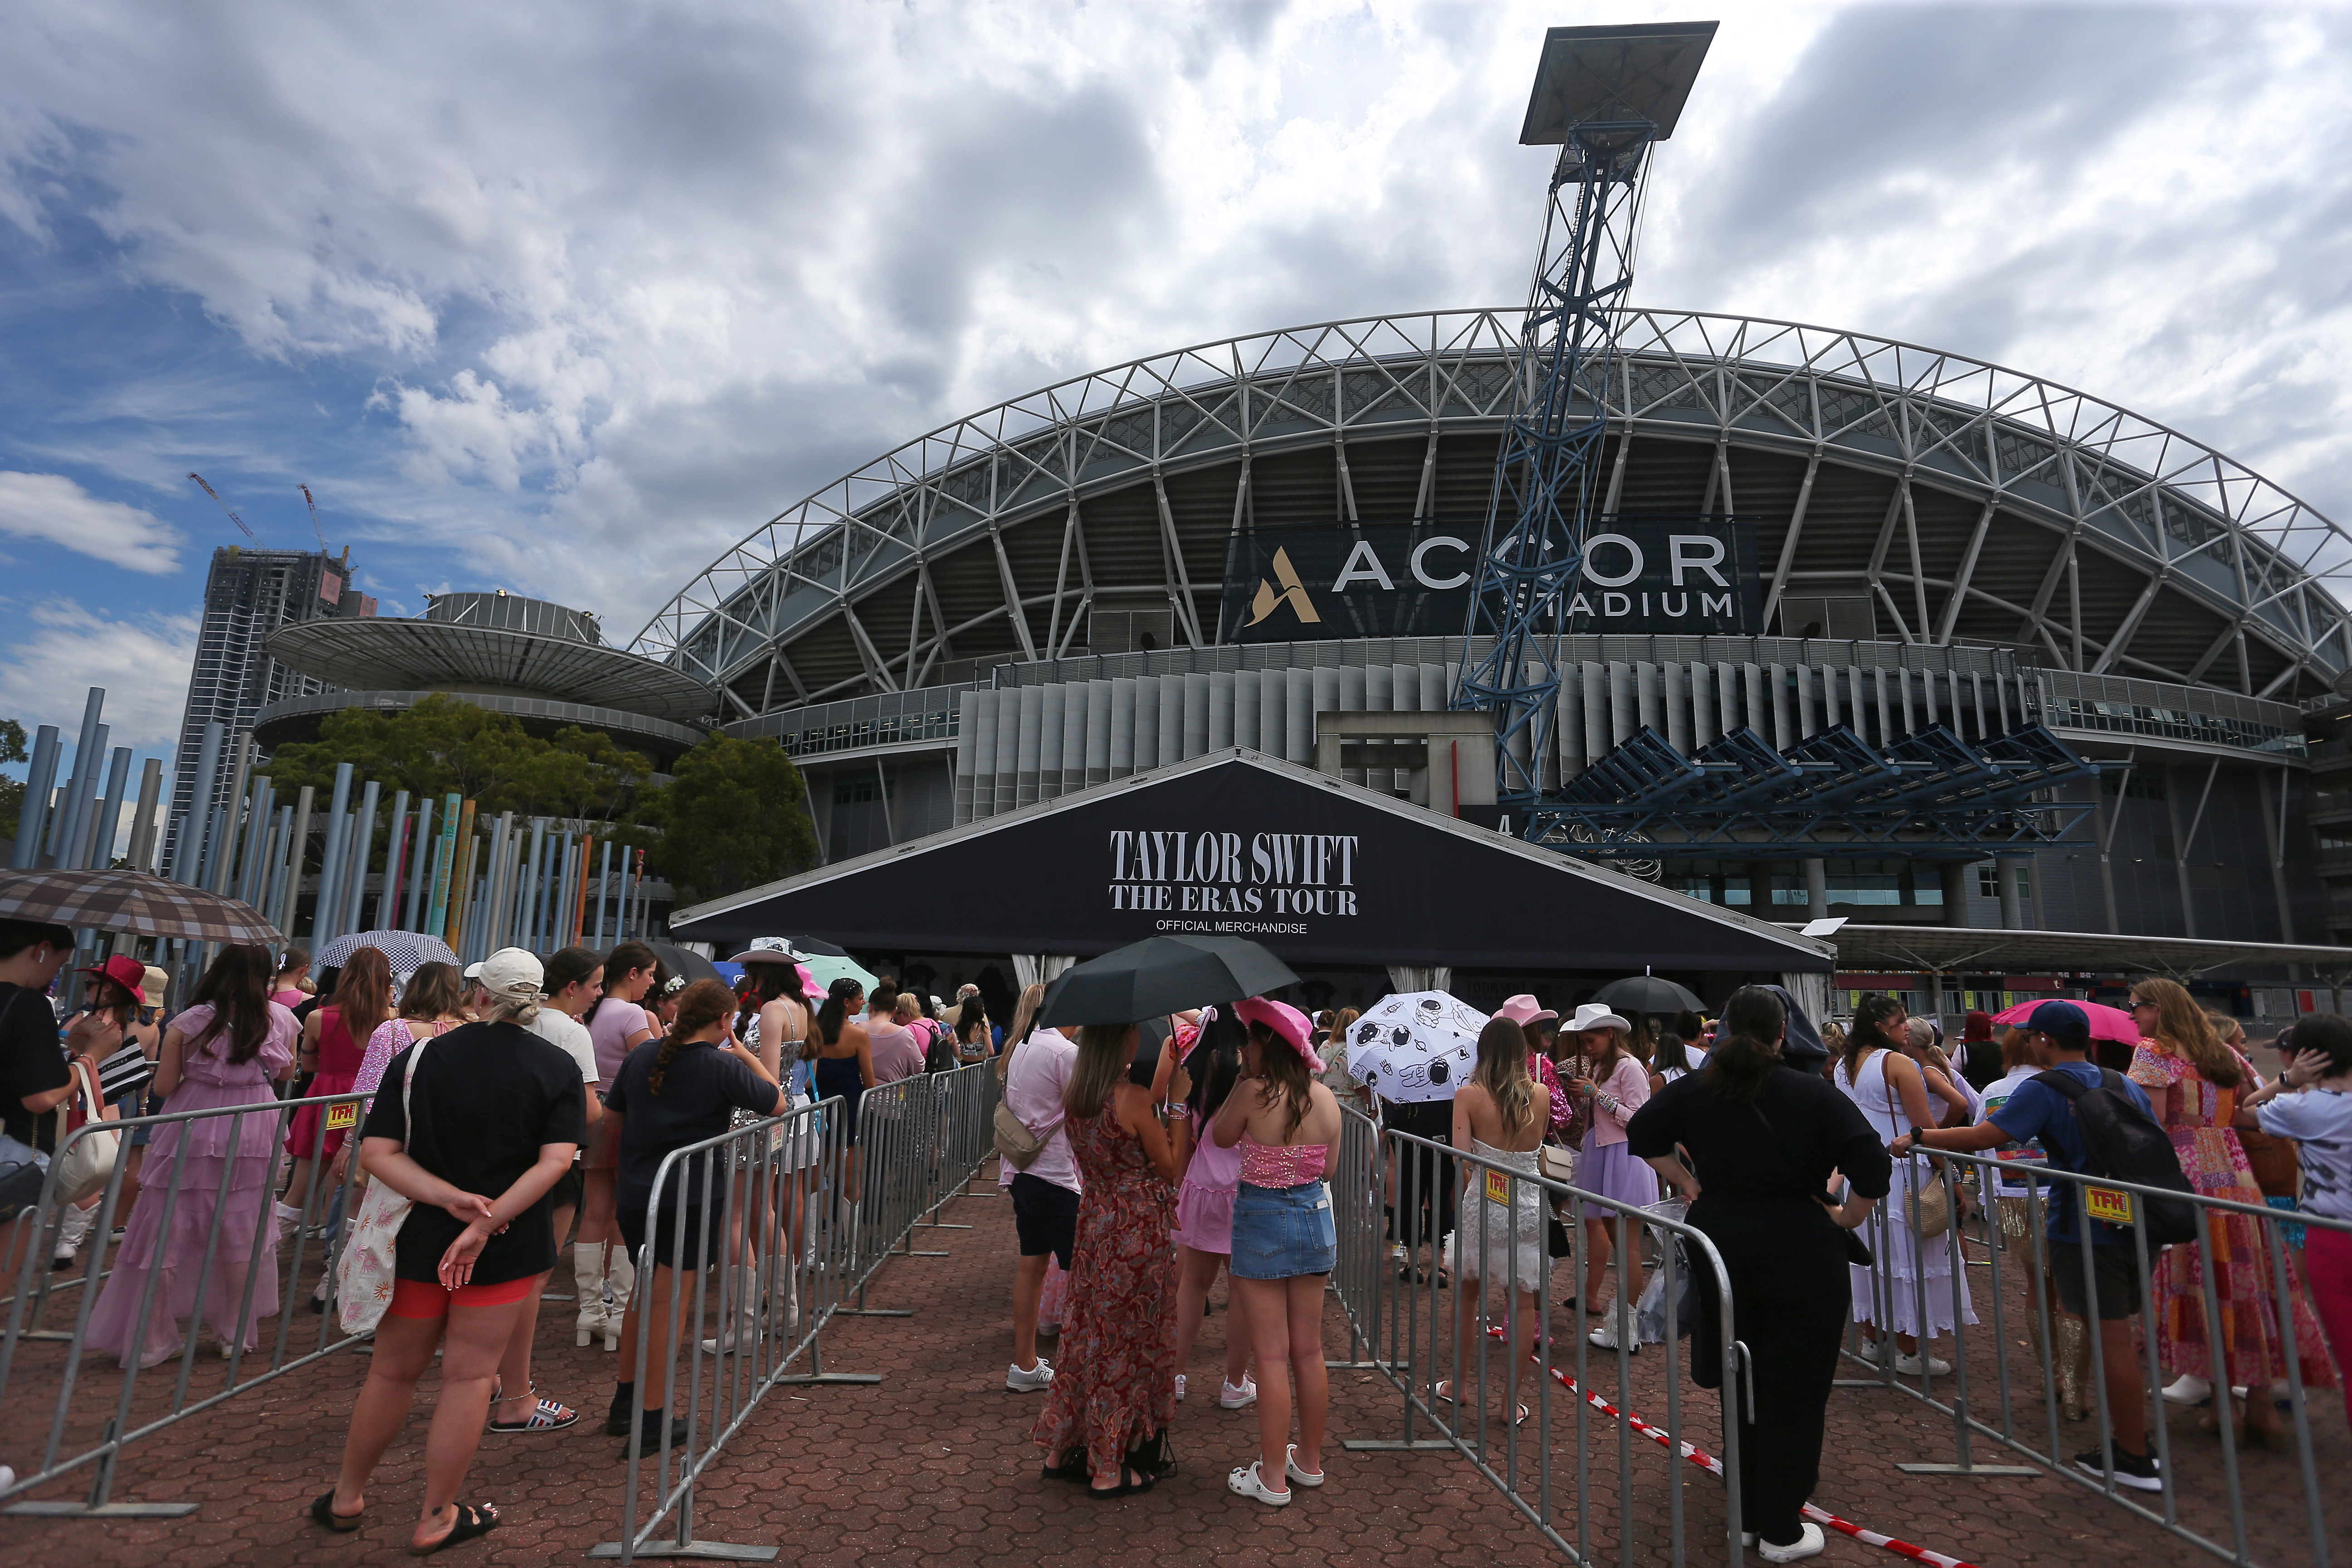 The mega stadium was partially evacuated due to 'severe' weather today